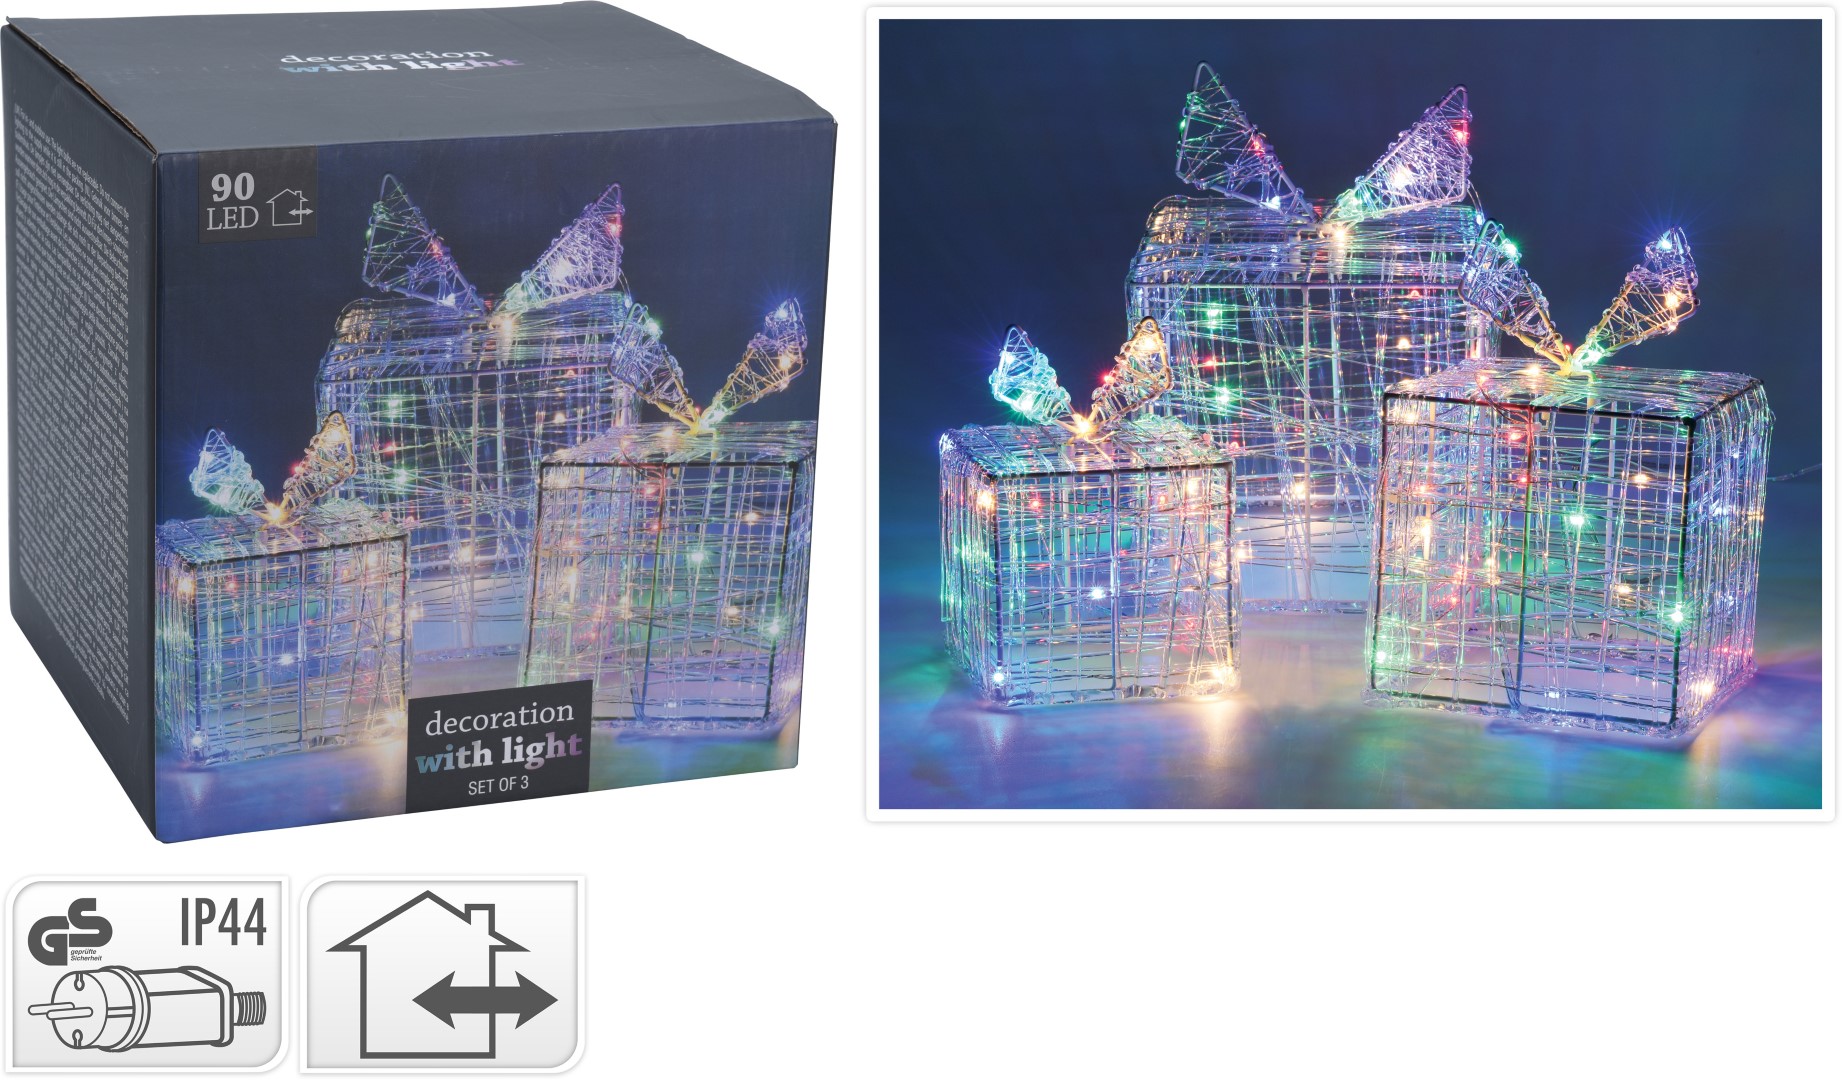 Cadeaus in 3 maten 90 led multi - Nampook